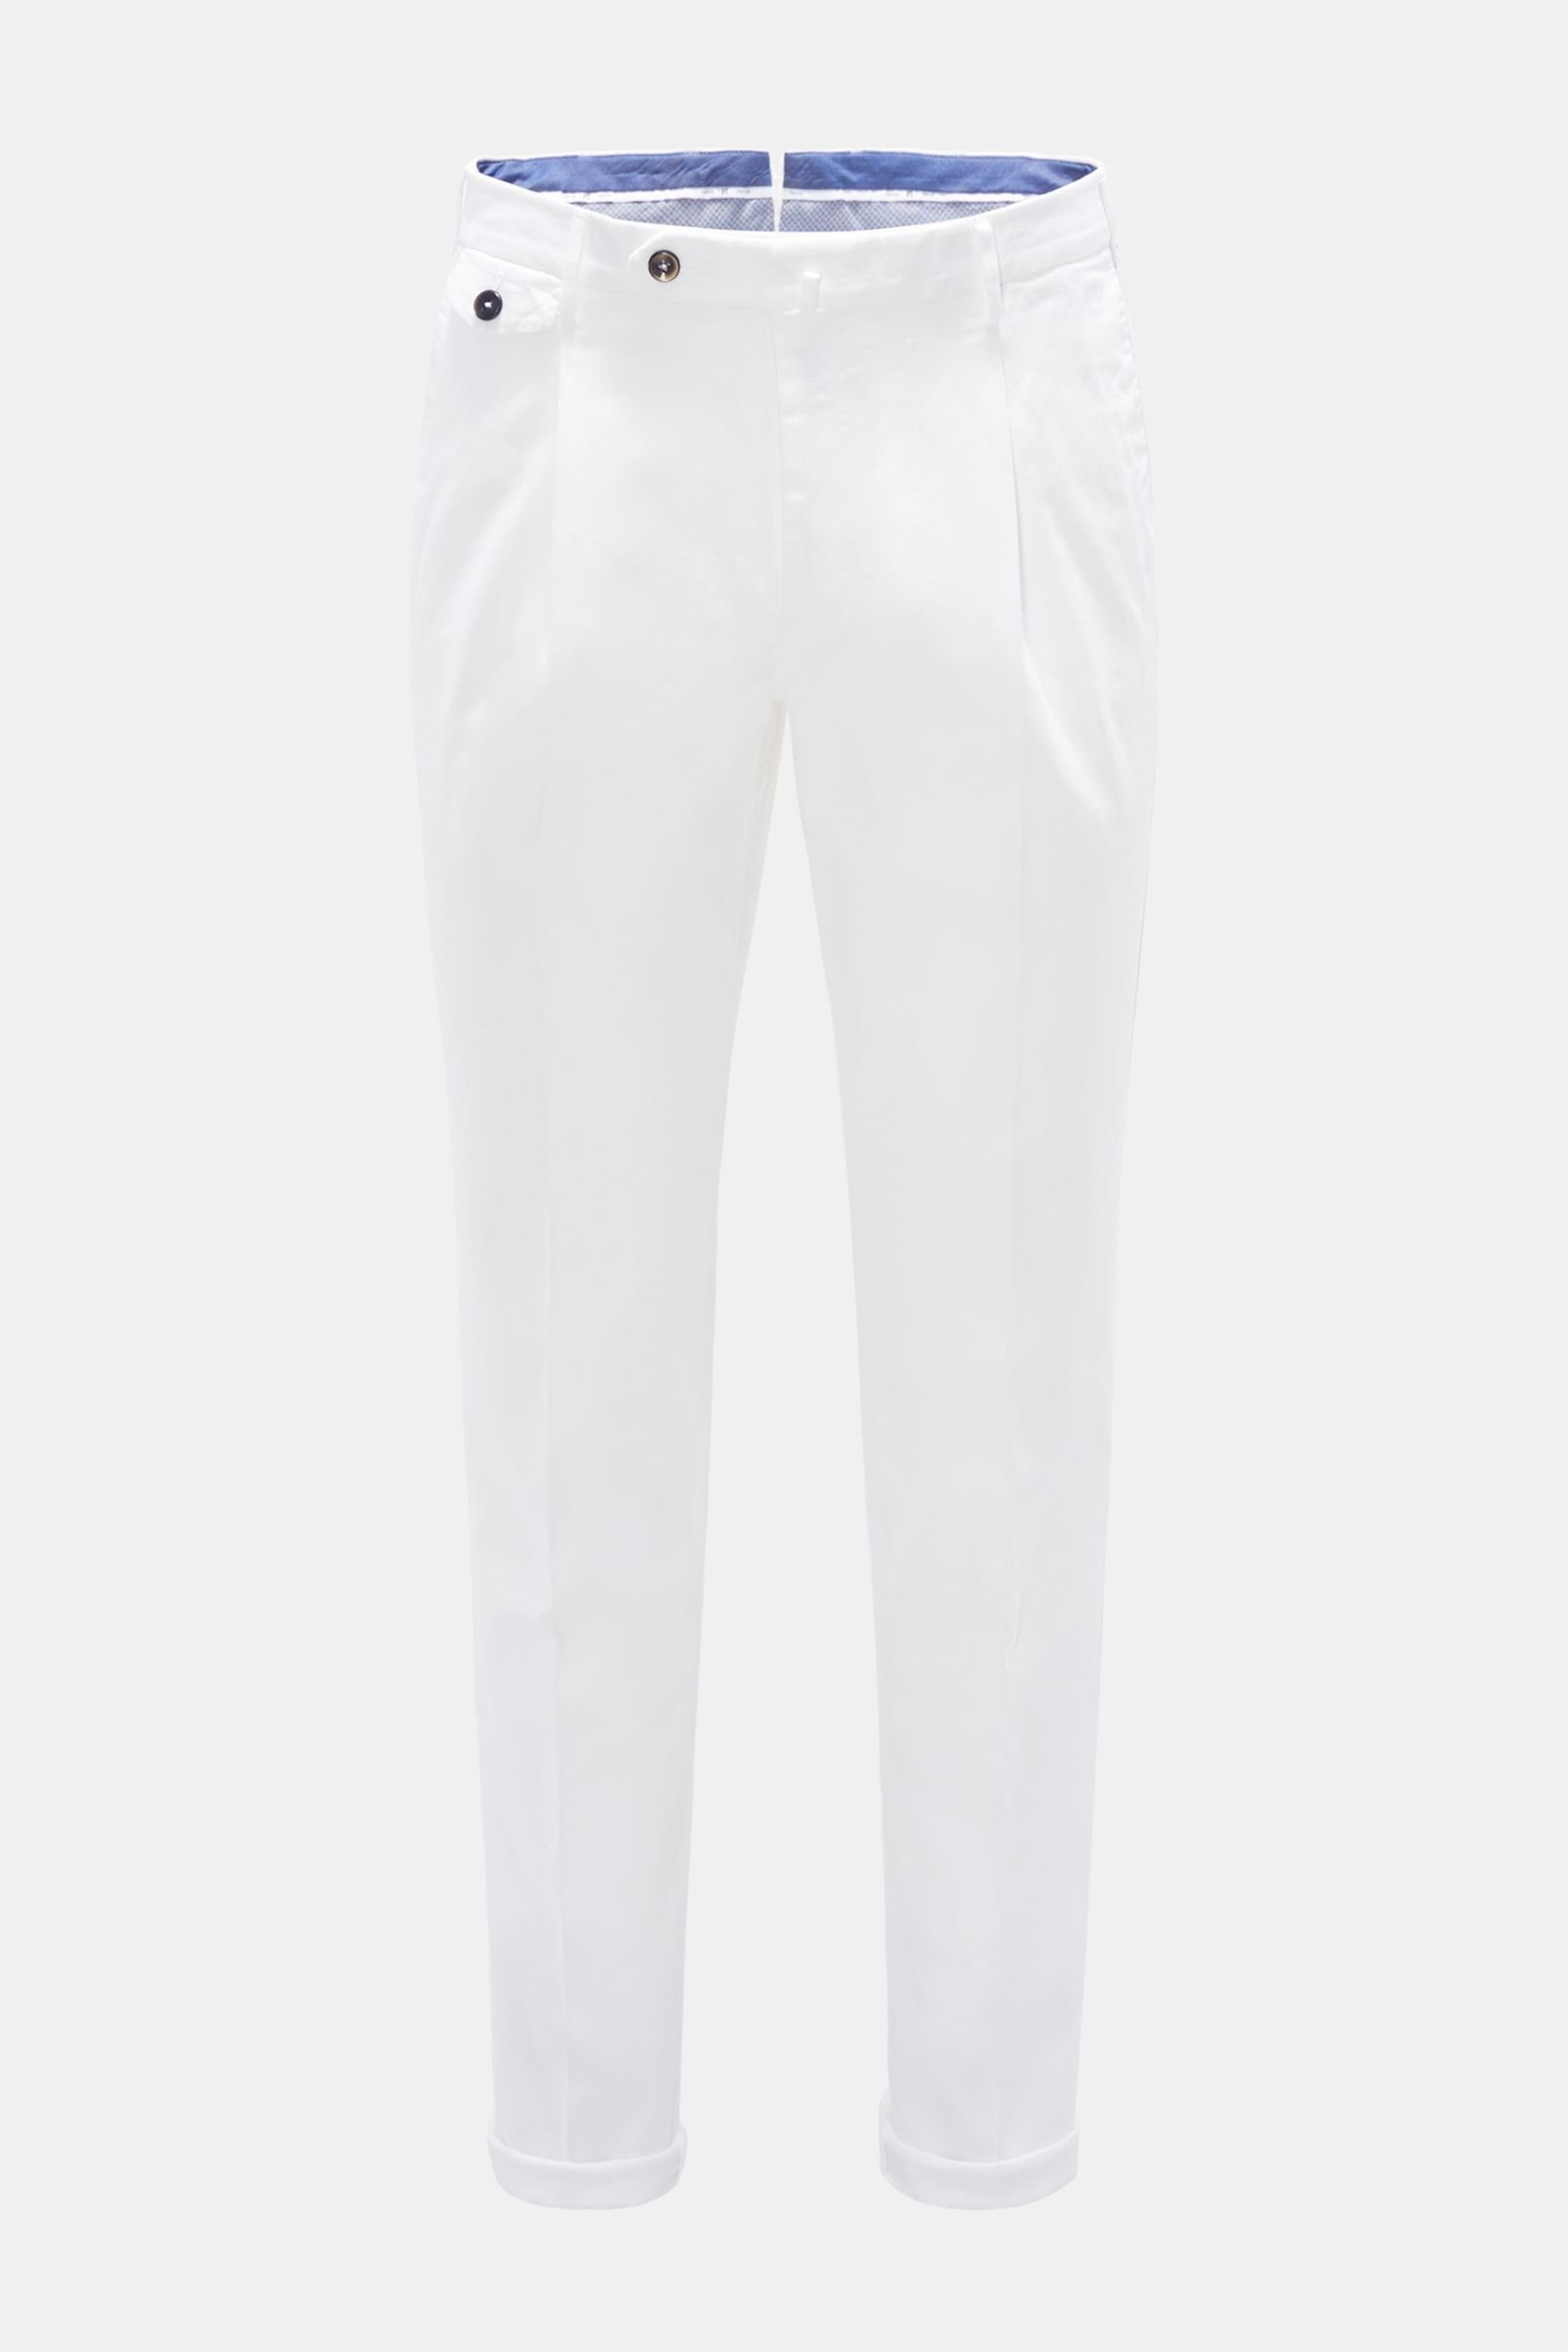 Cotton trousers 'Gentleman Fit' white